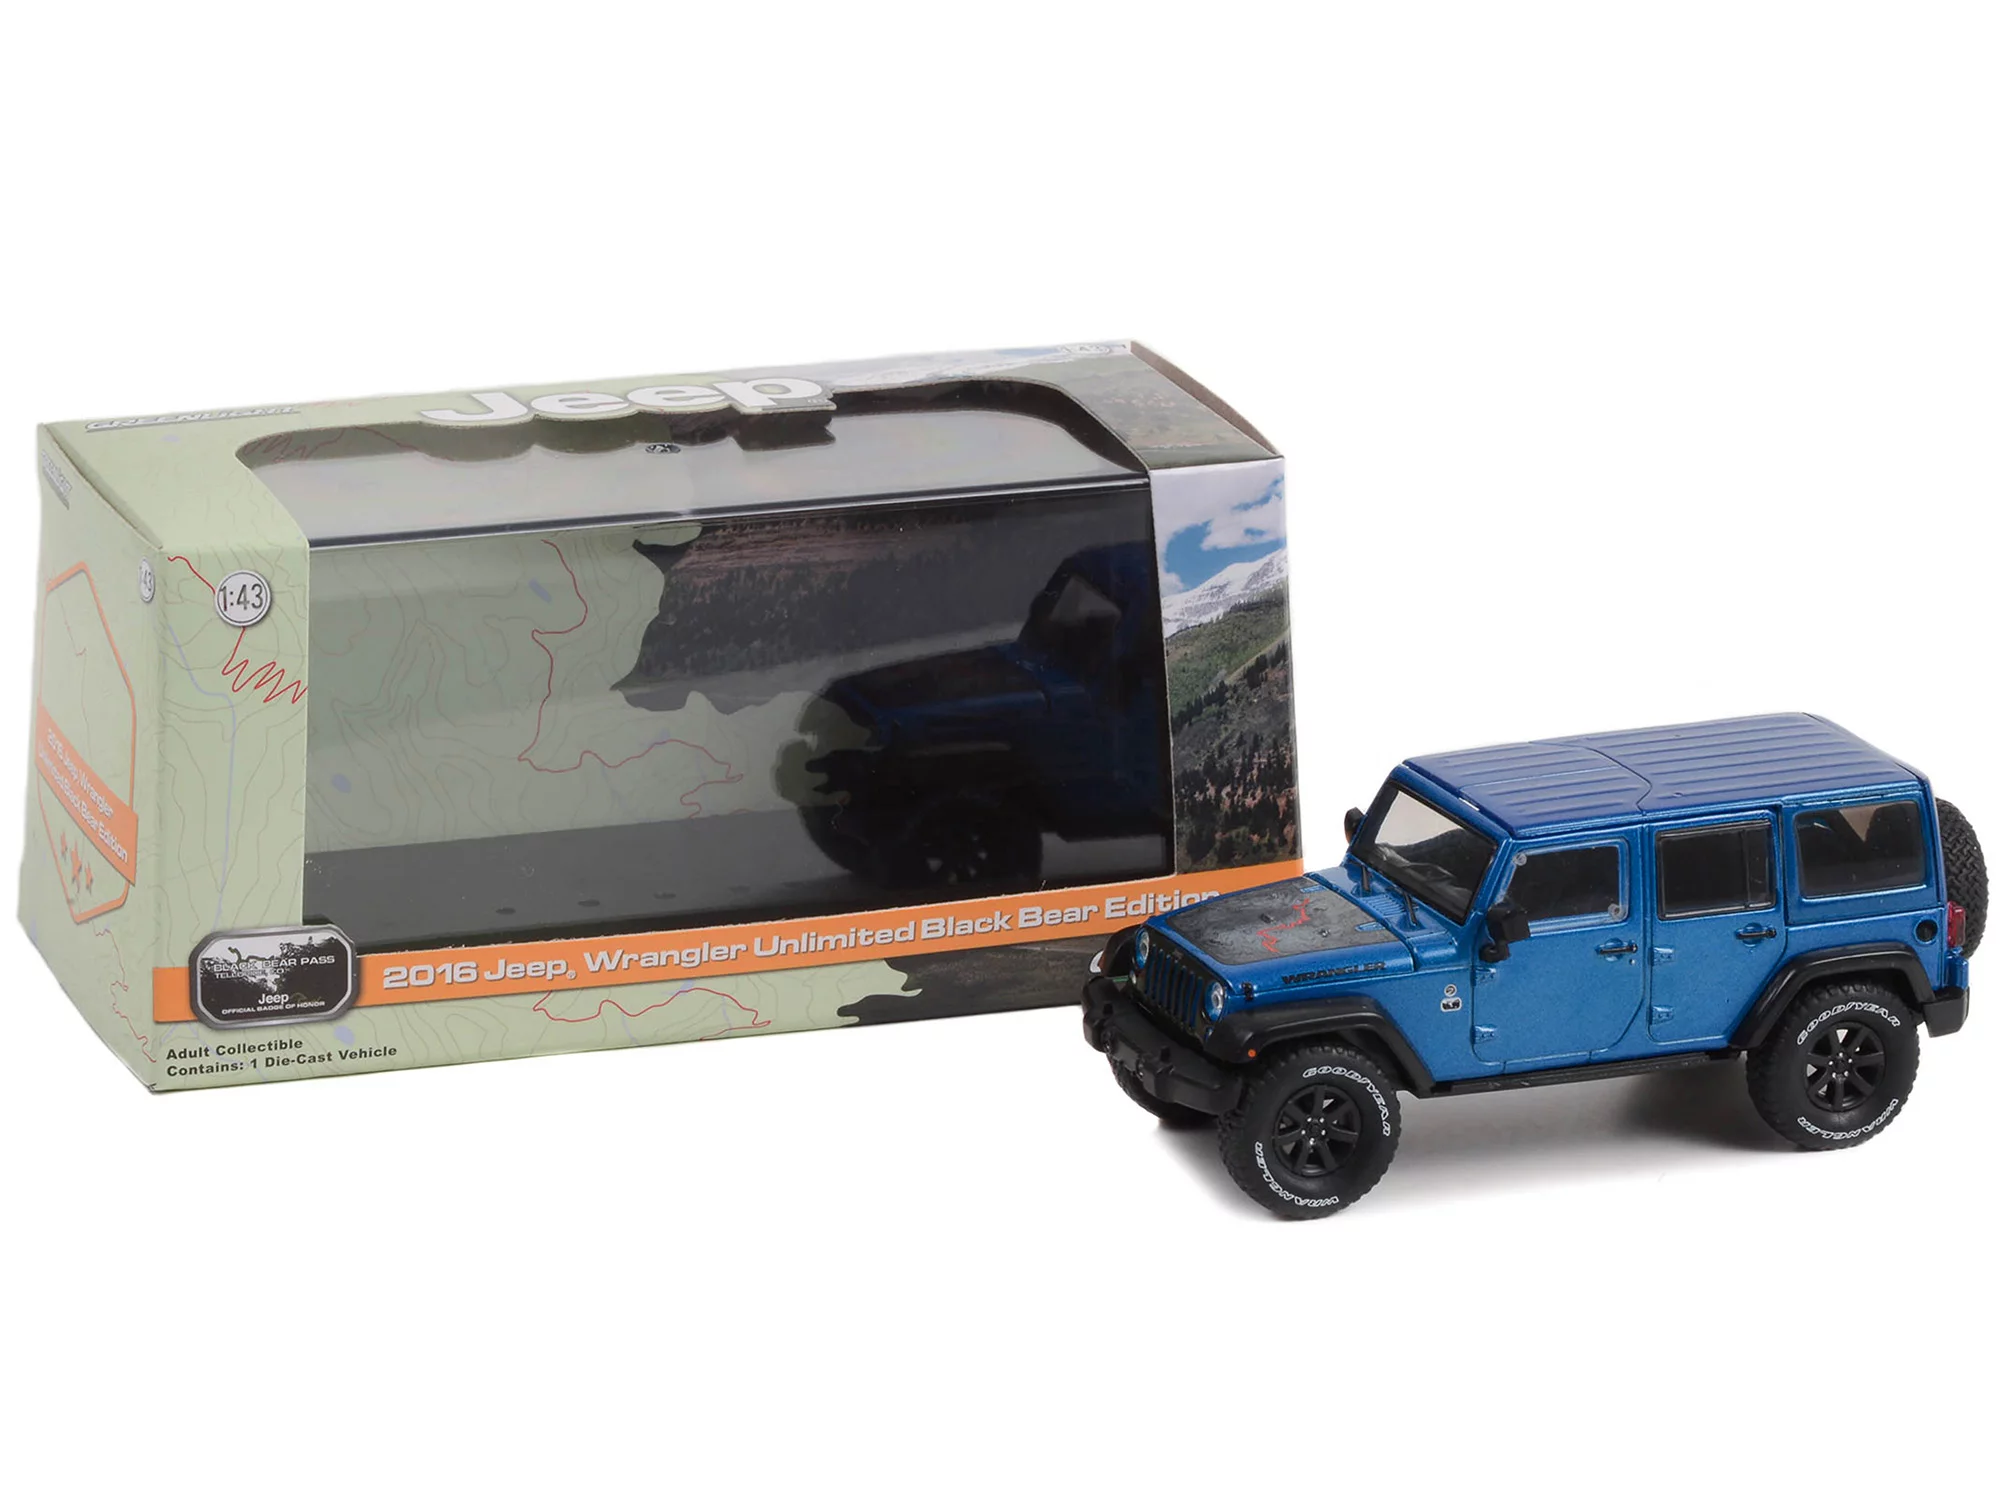 Greenlight 1:43 2016 Jeep Wrangler Unlimited Black Bear Edition - Jeep Official Badge of Honor - Black Bear Pass, Telluride, Colorado - Hydro Blue Pearl 86198 - Thumbnail